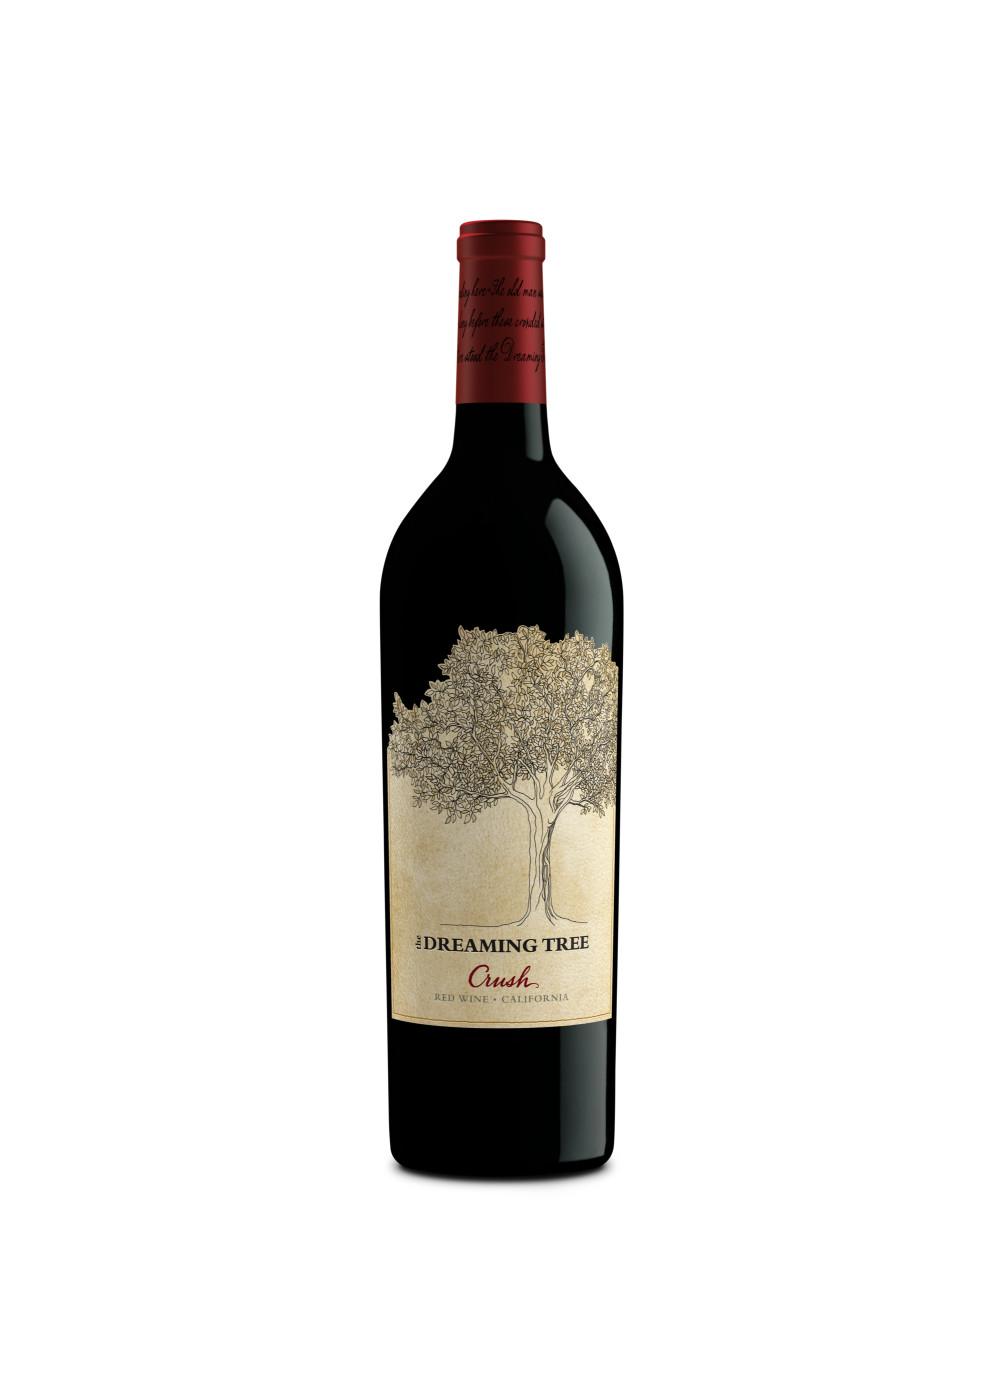 The Dreaming Tree Crush Red Blend Red Wine Bottle; image 1 of 7